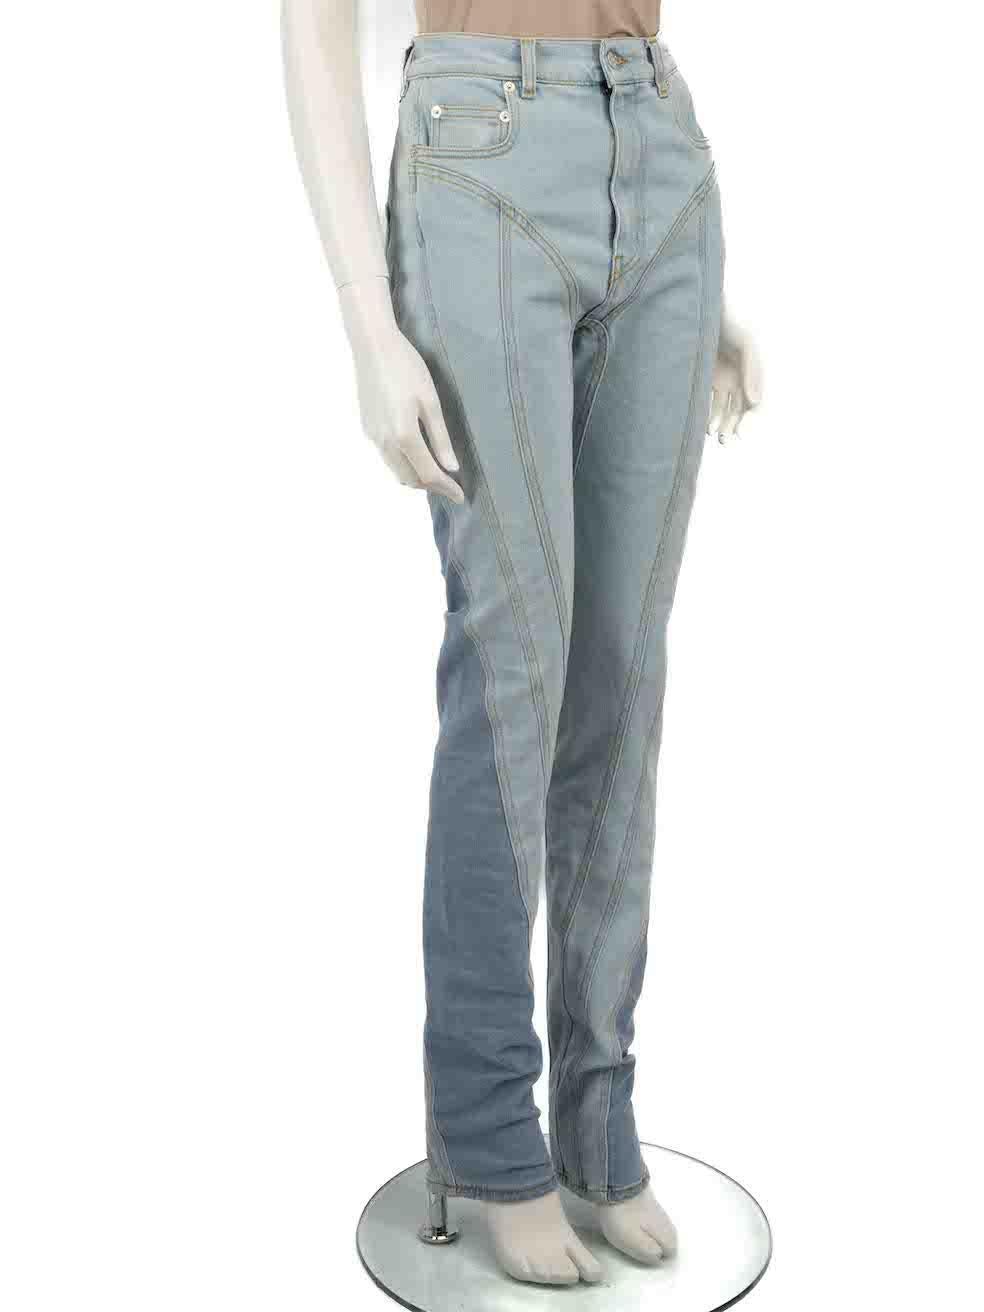 CONDITION is Very good. Hardly any visible wear to trousers is evident on this used Mugler designer resale item.

Details
Blue
Denim
Jeans
Skinny fit
]Mid rise
Spiral panelled detail
3x Front pockets
2x Back pockets
Fly zip and button fastening
